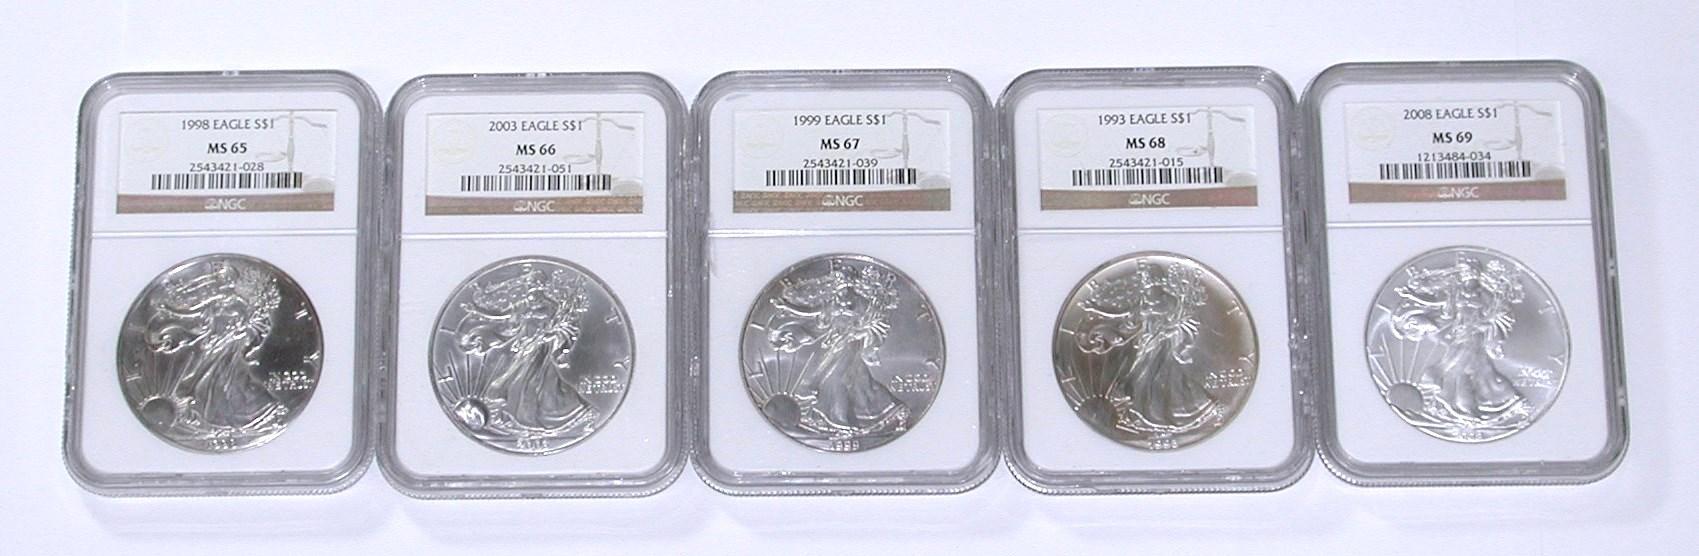 FIVE (5) SILVER EAGLES in NGC HOLDERS - MS65, MS66, MS67, MS68, MS69